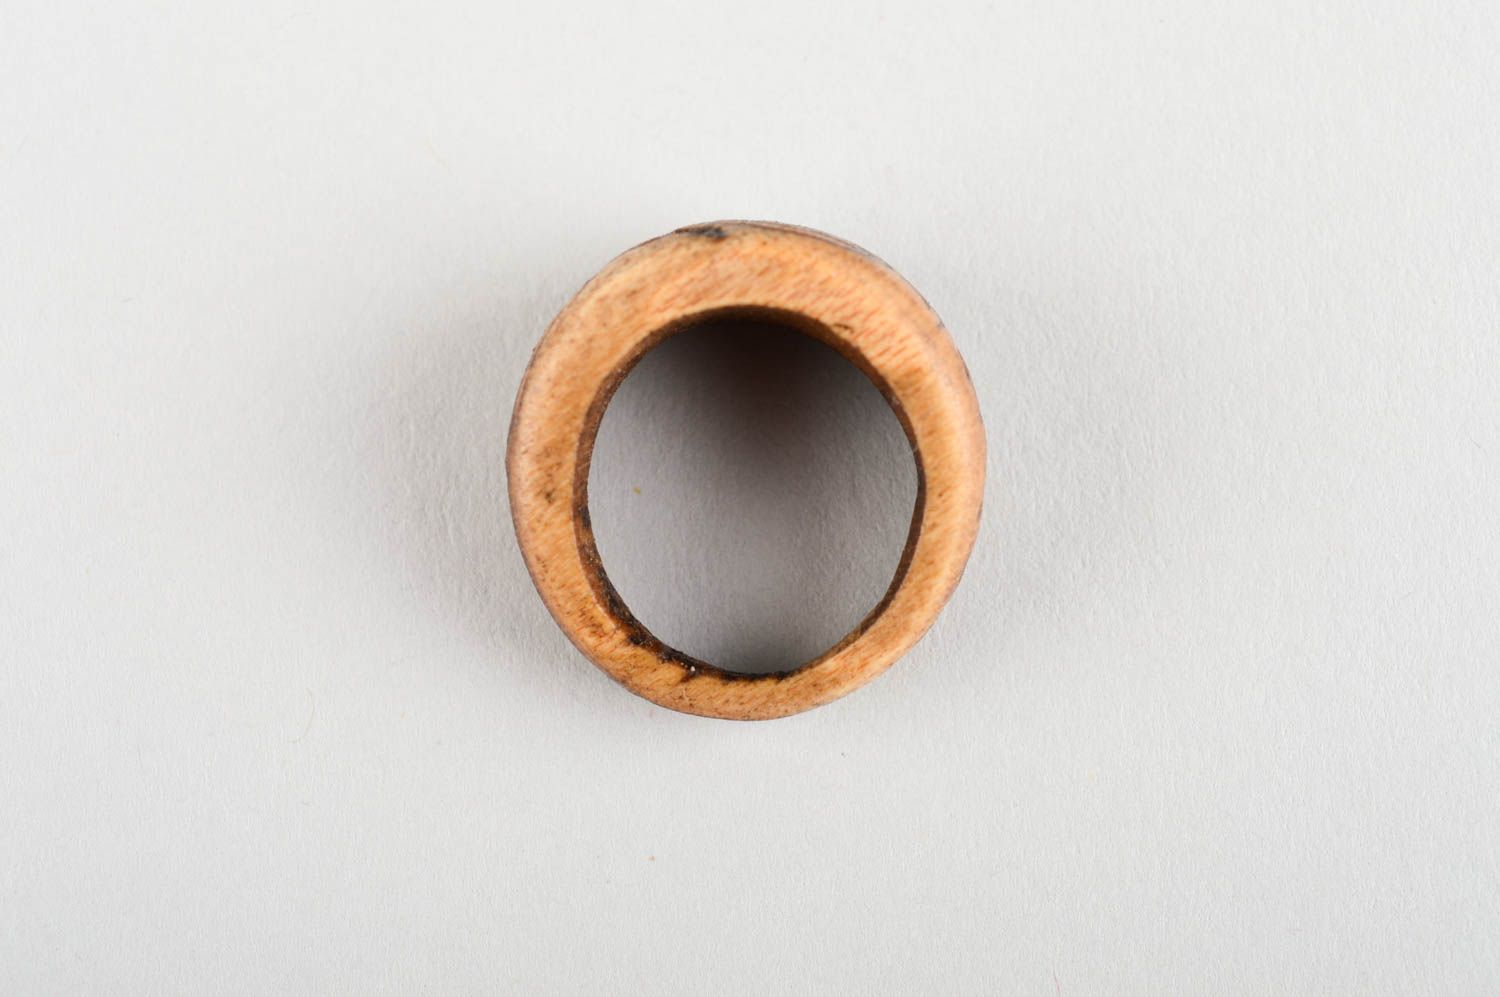 Beautiful handmade wooden ring fashion trends accessories for girls wood craft photo 2